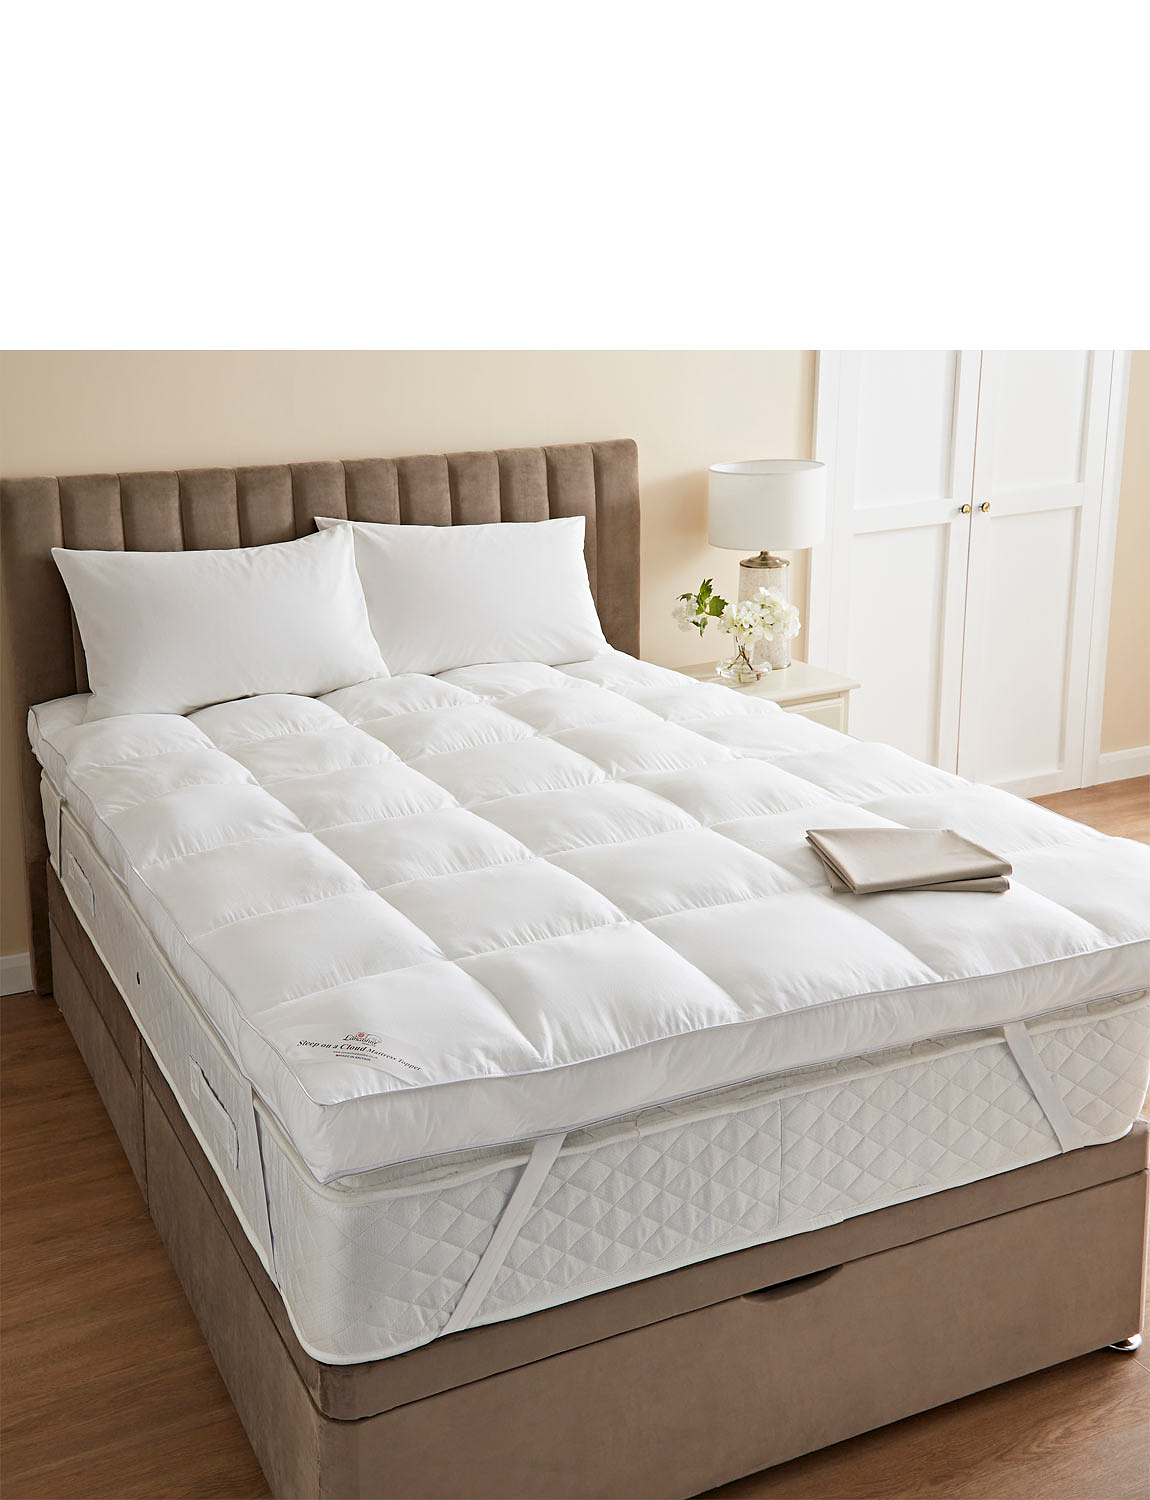 Single/Double/King EXTRA FILLED Luxury Hollowfibre Mattress Topper 